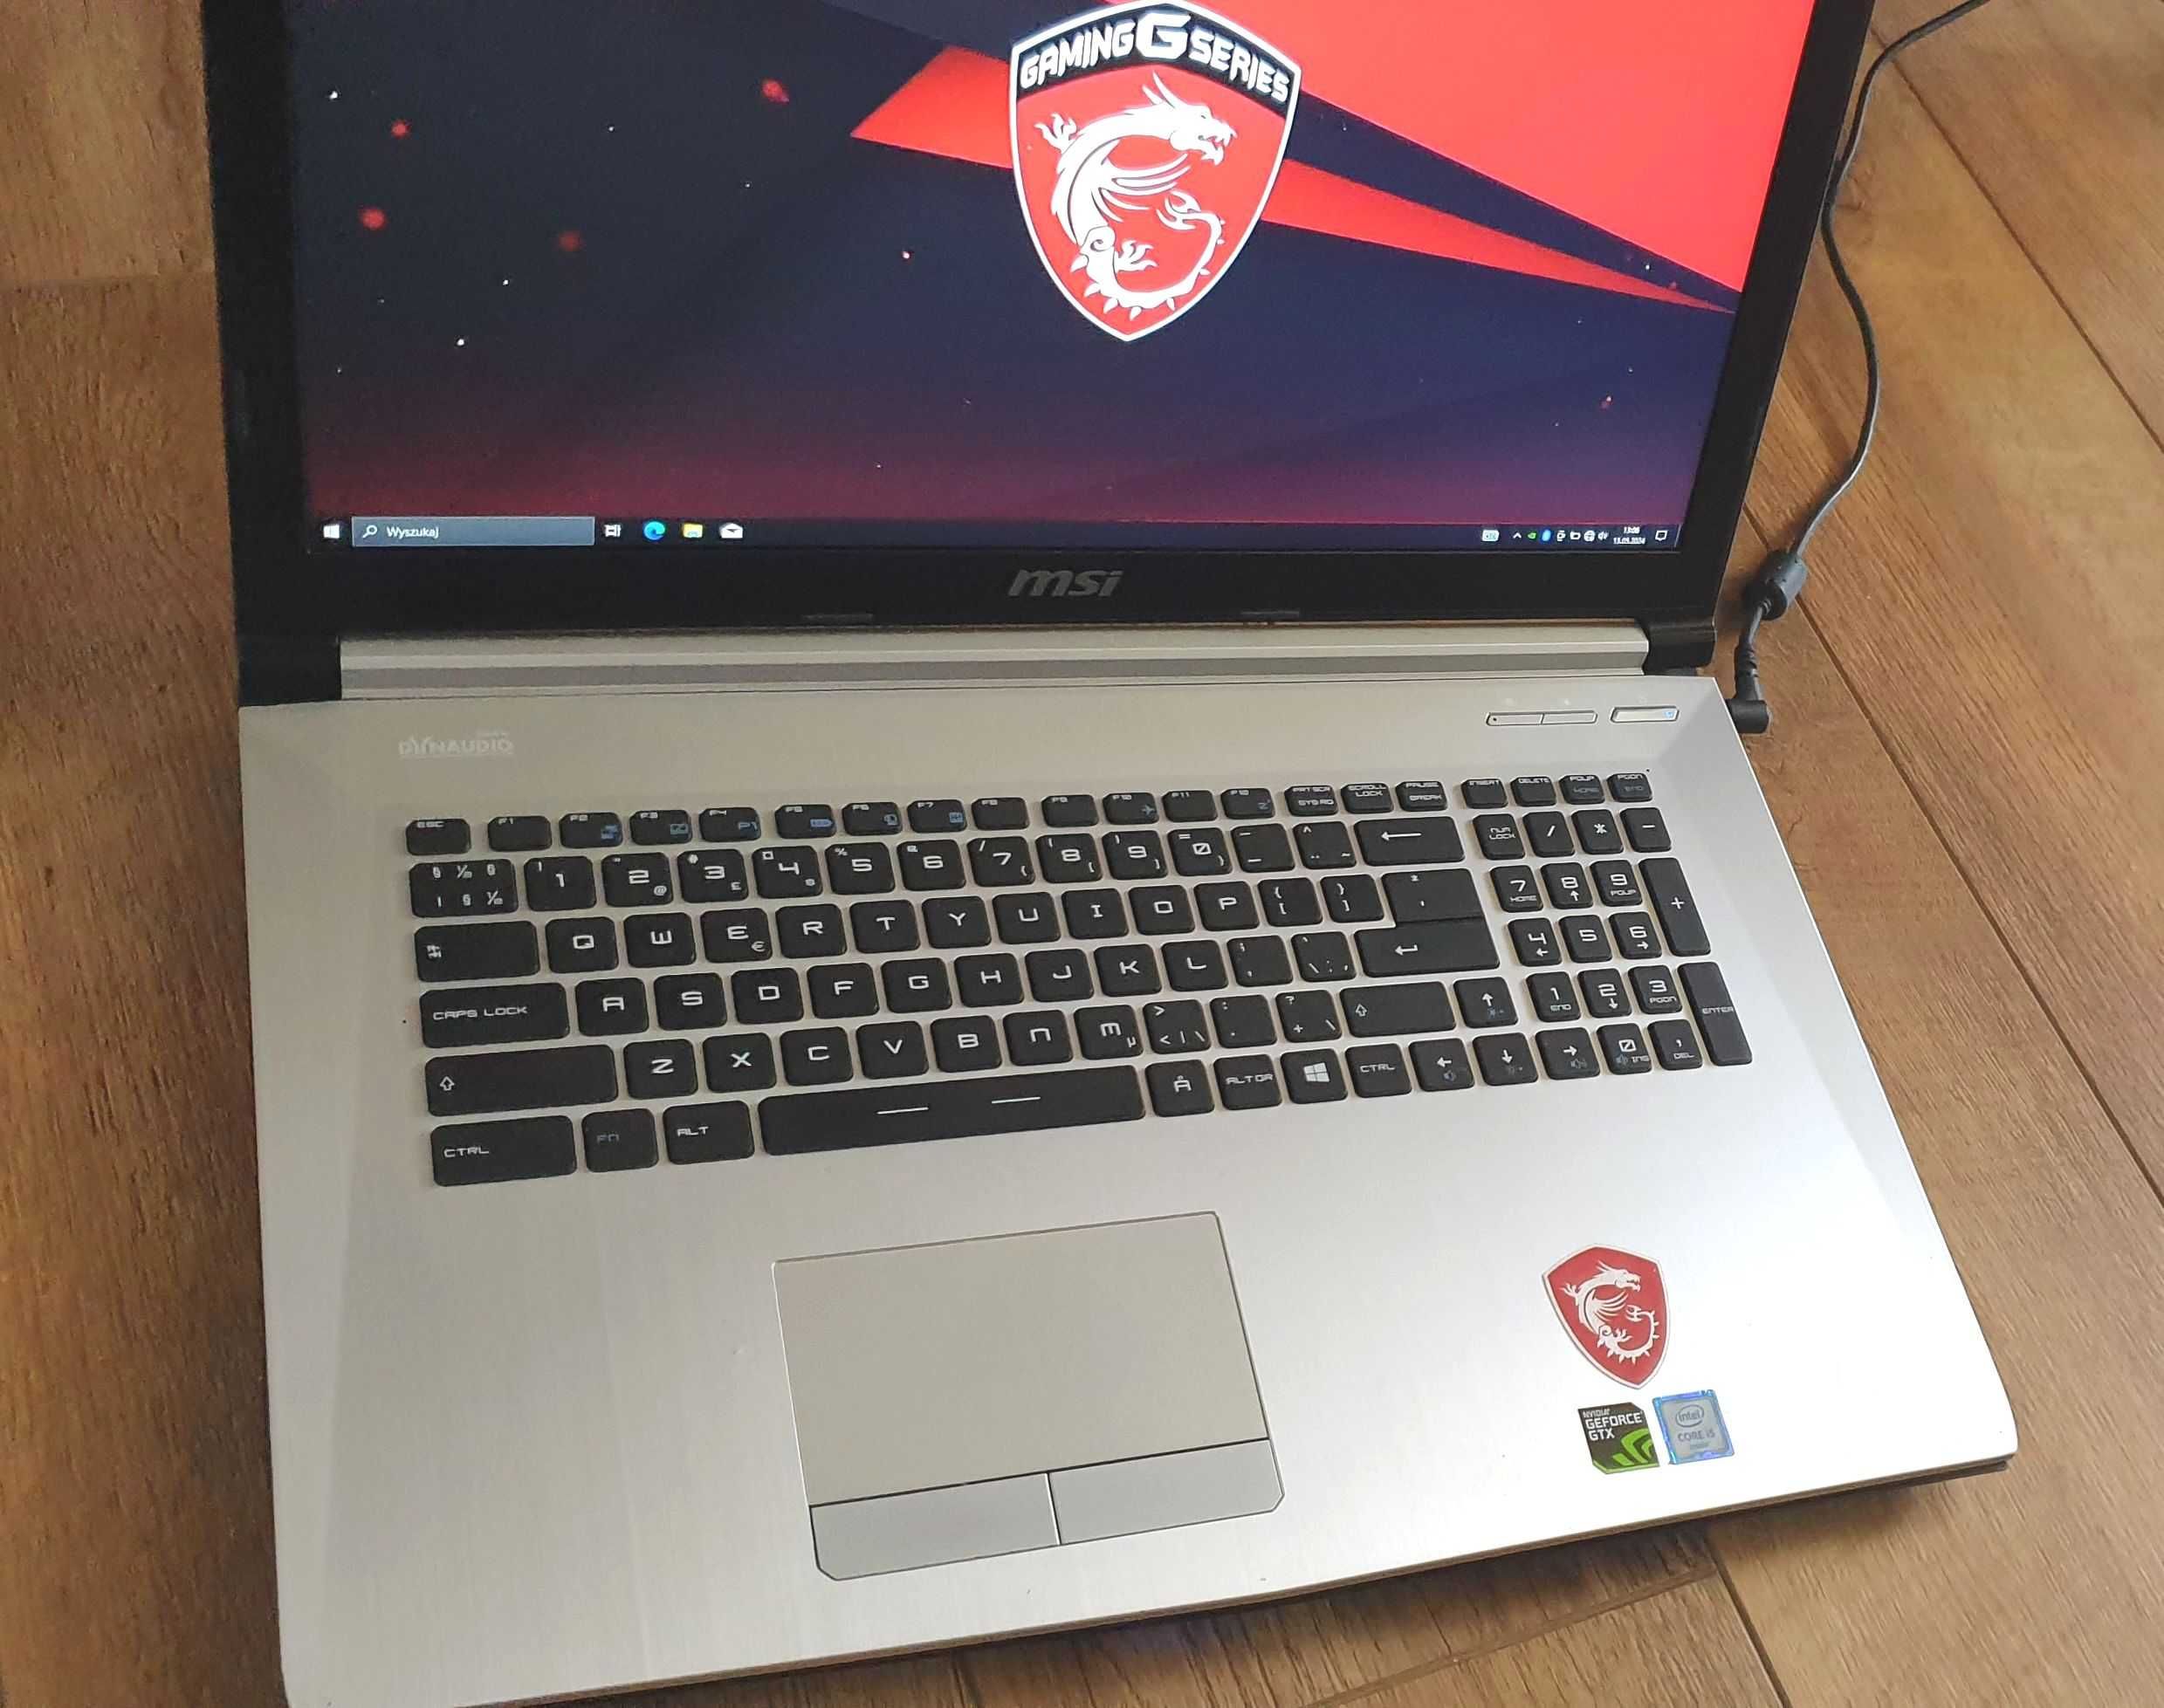 MSI Geforce laptop do gier gamingowy 17,3 nvidia GTX950 ssd gaming 17"